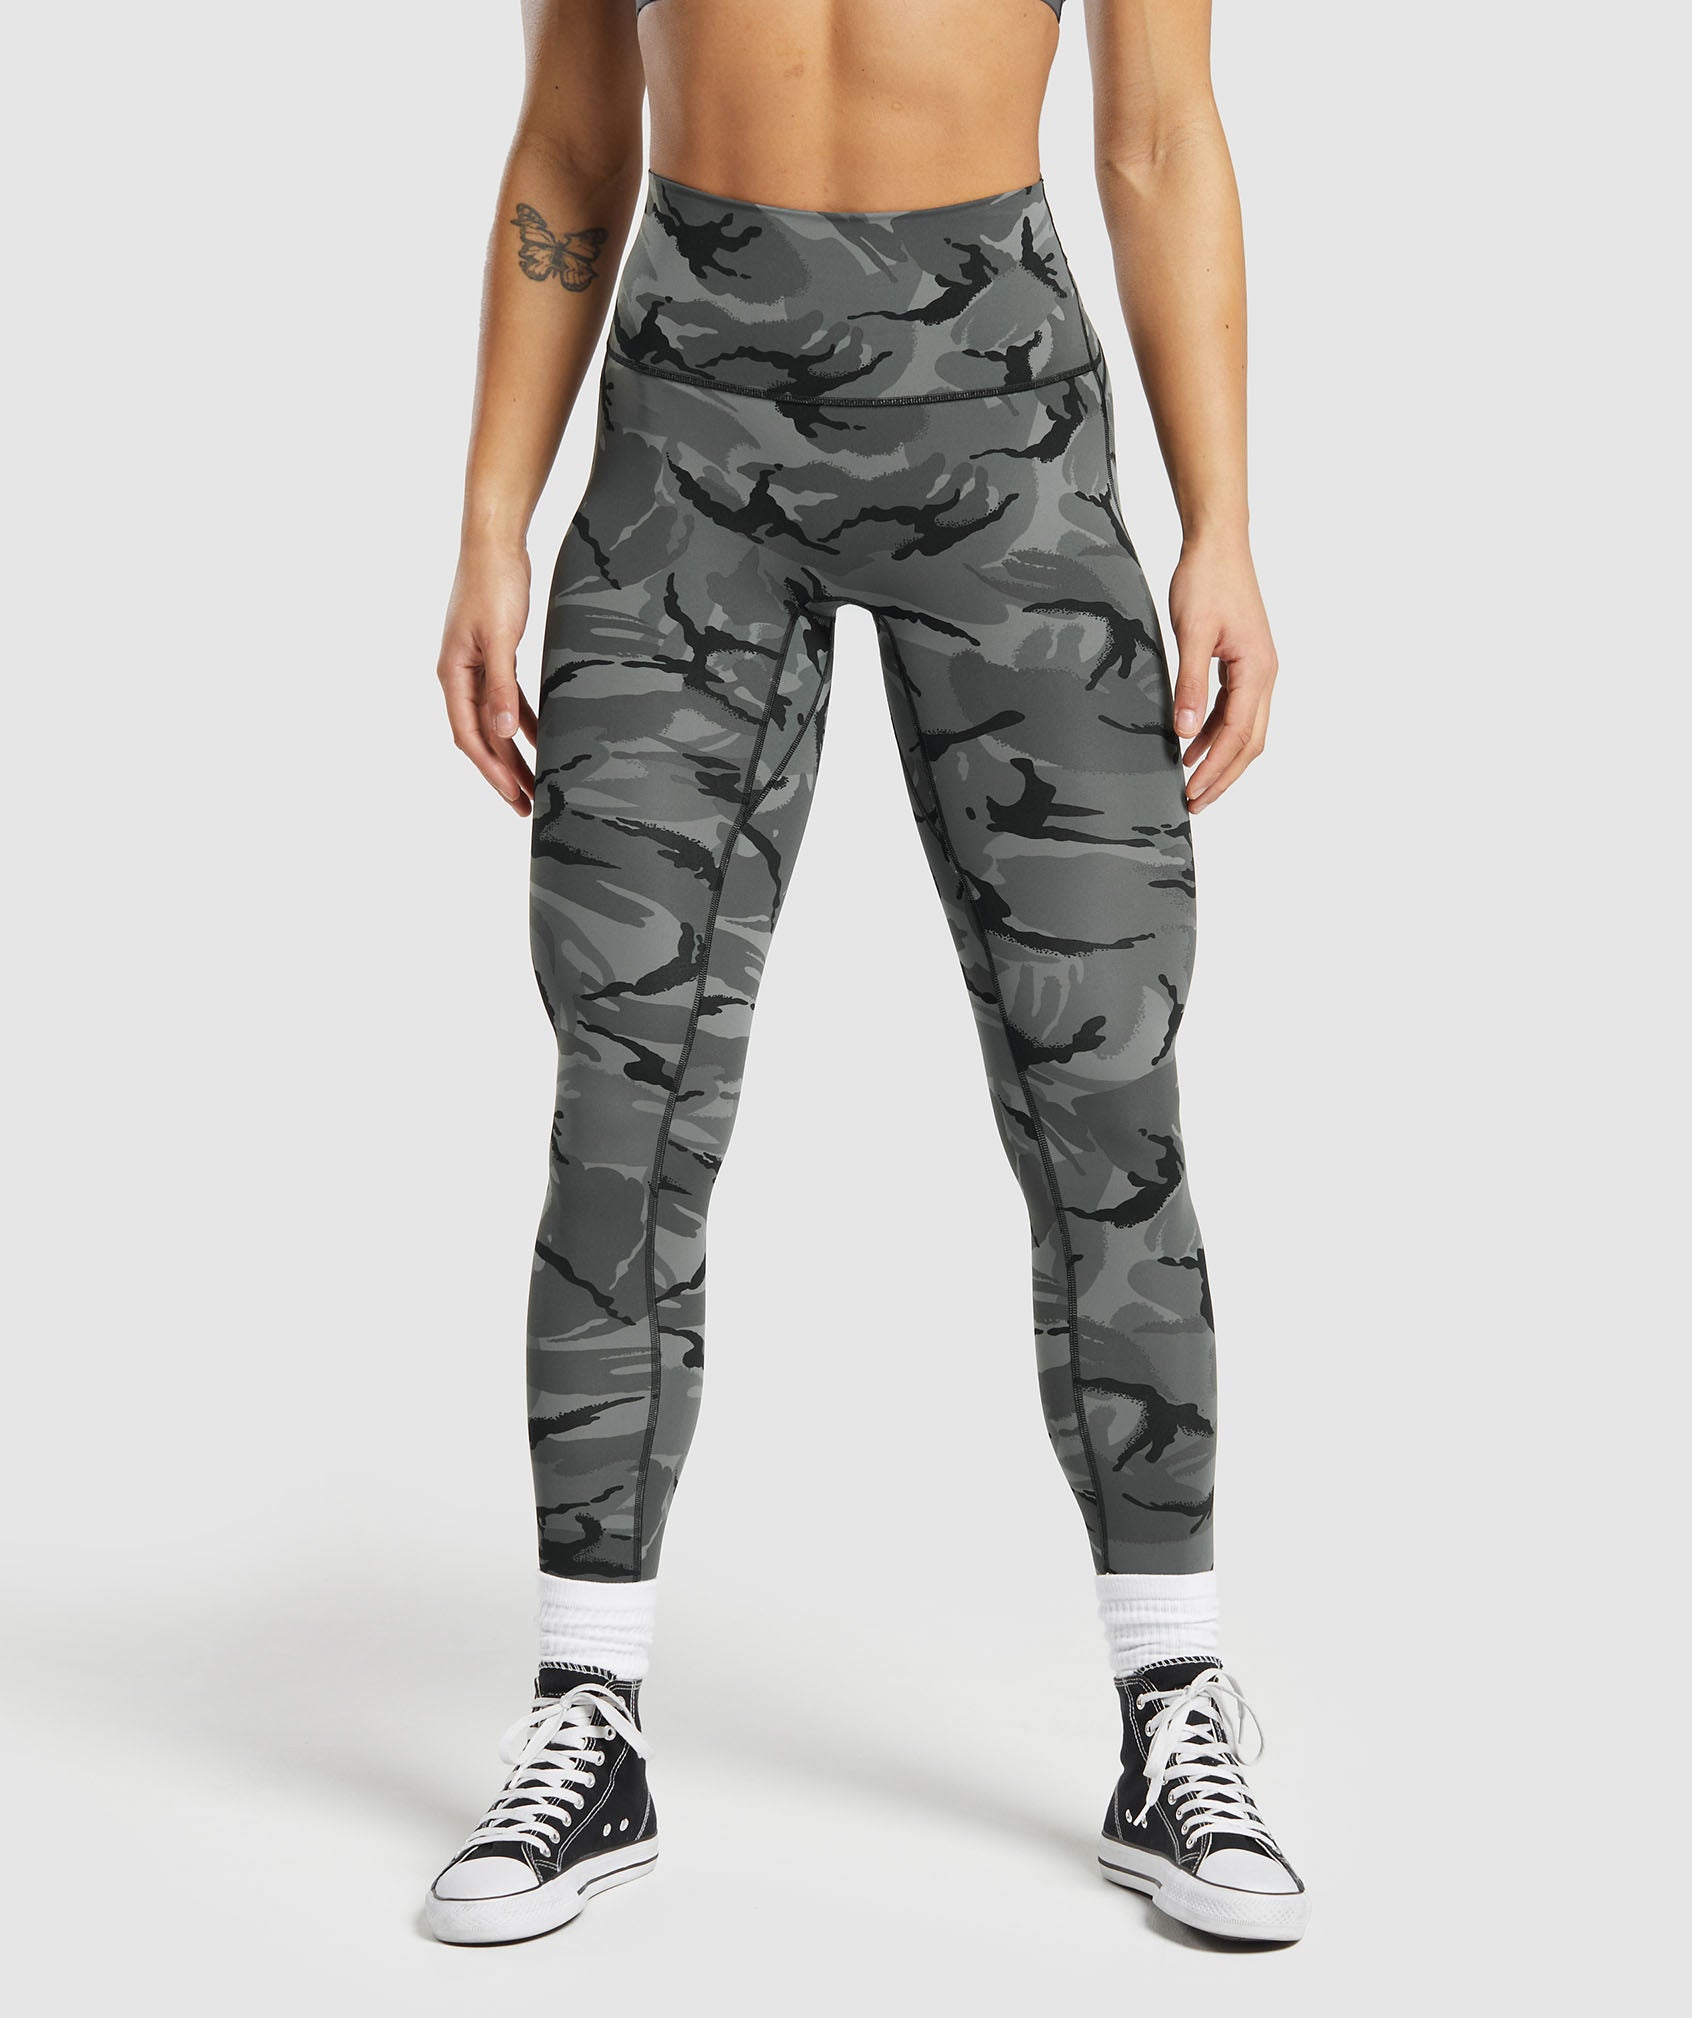 Women's Legacy Collection – Gymshark